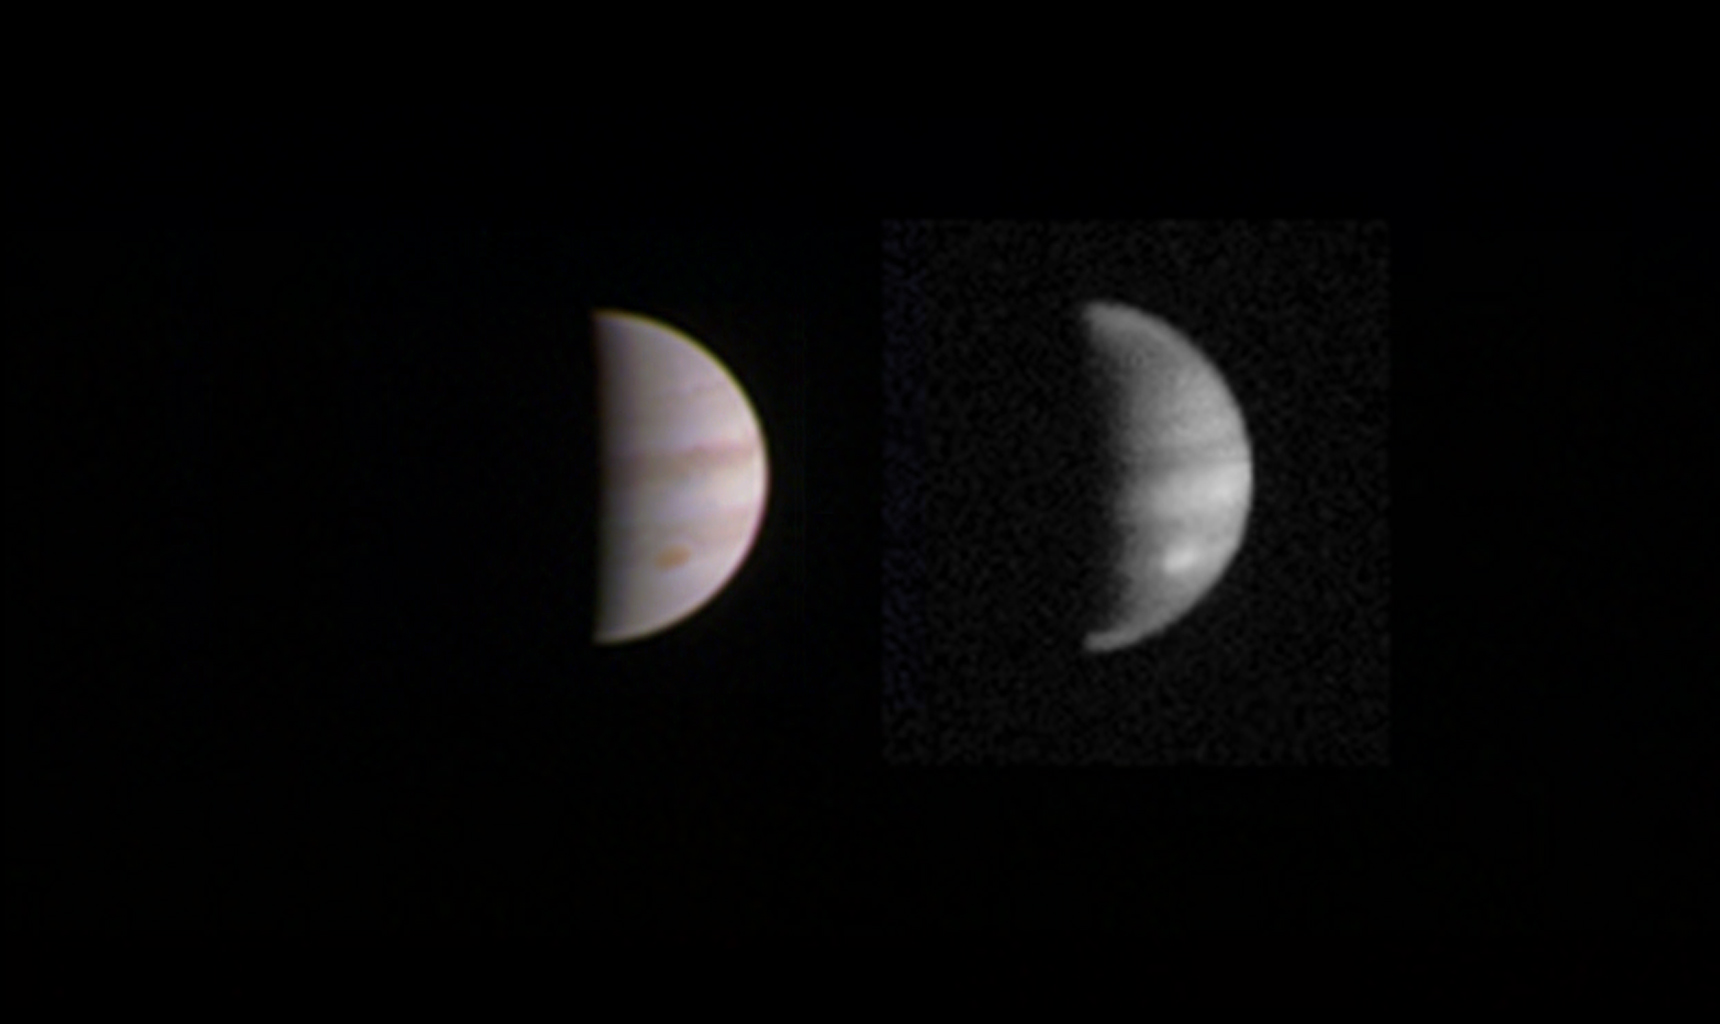 This dual view of Jupiter was taken on August 23, when NASA's Juno spacecraft was 2.8 million miles (4.4 million kilometers) from the gas giant planet on the inbound leg of its initial 53.5-day capture orbit. Image: NASA/JPL-Caltech/SwRI/MSSS